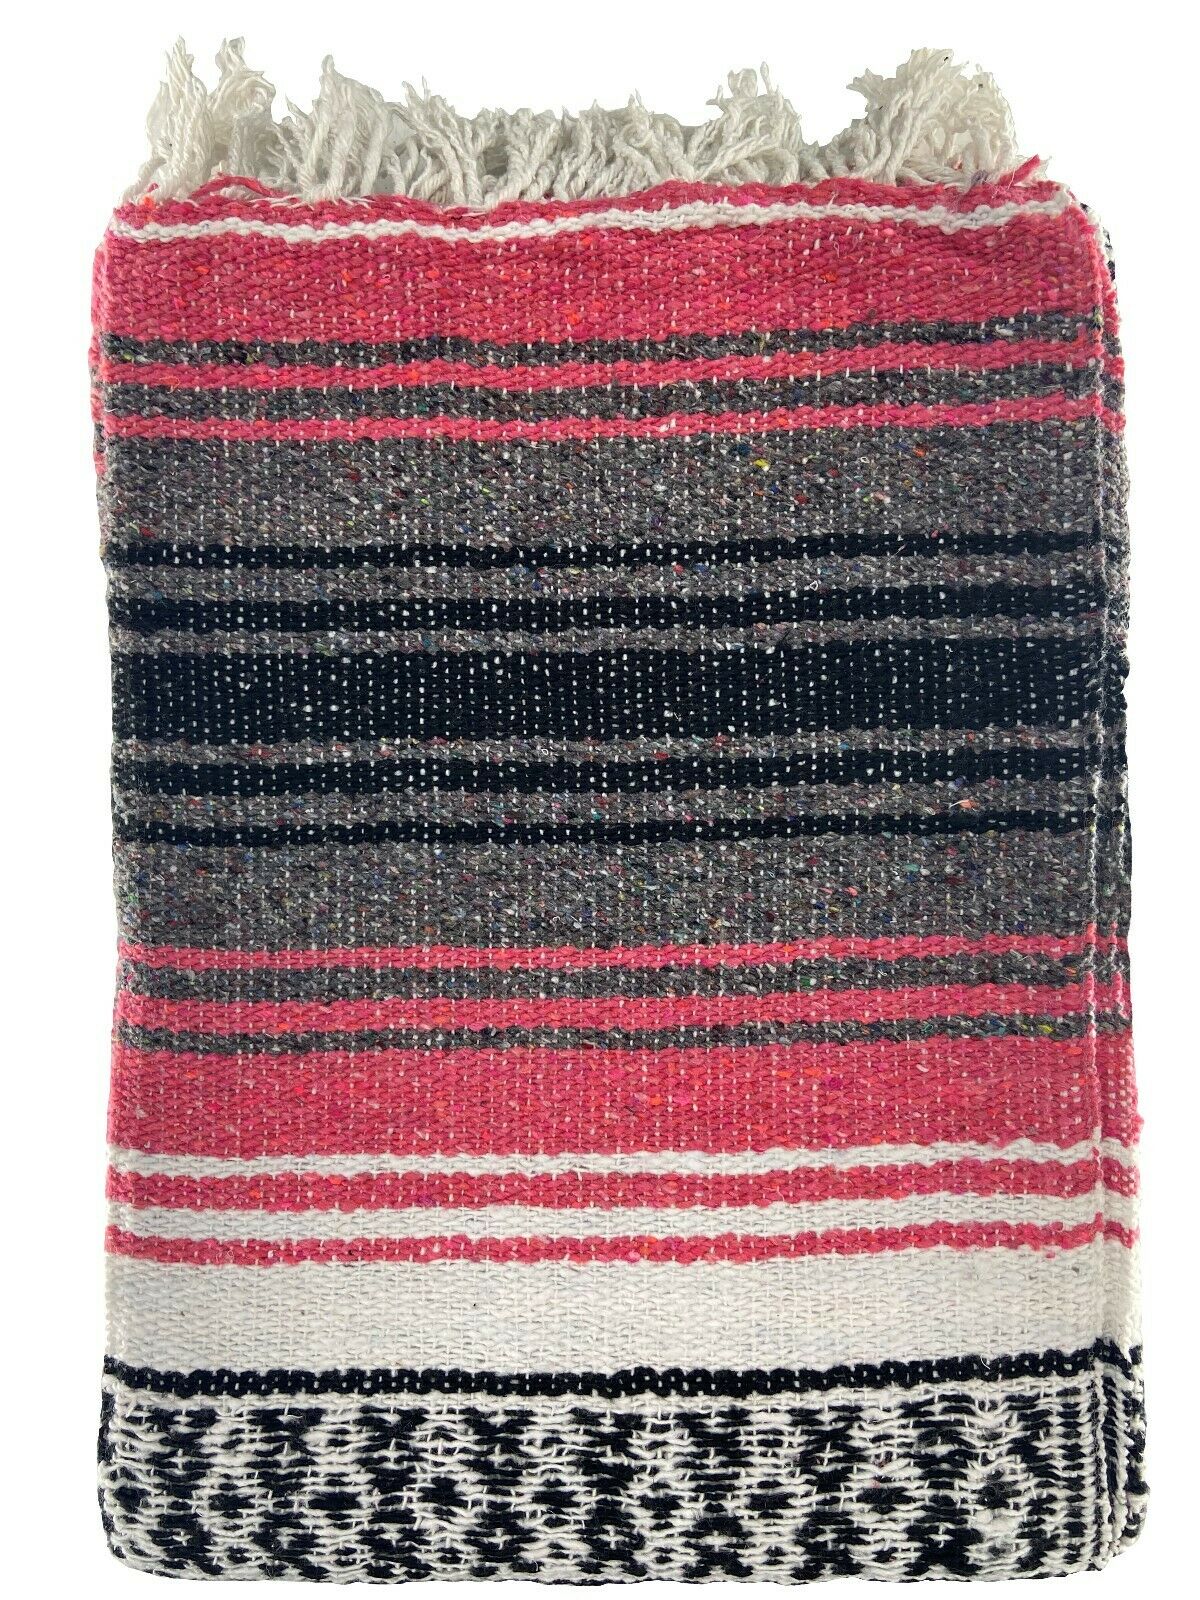 Authentic Mexican Falsa Blanket Hand Woven Yoga Mat Blanket 74" X 51"